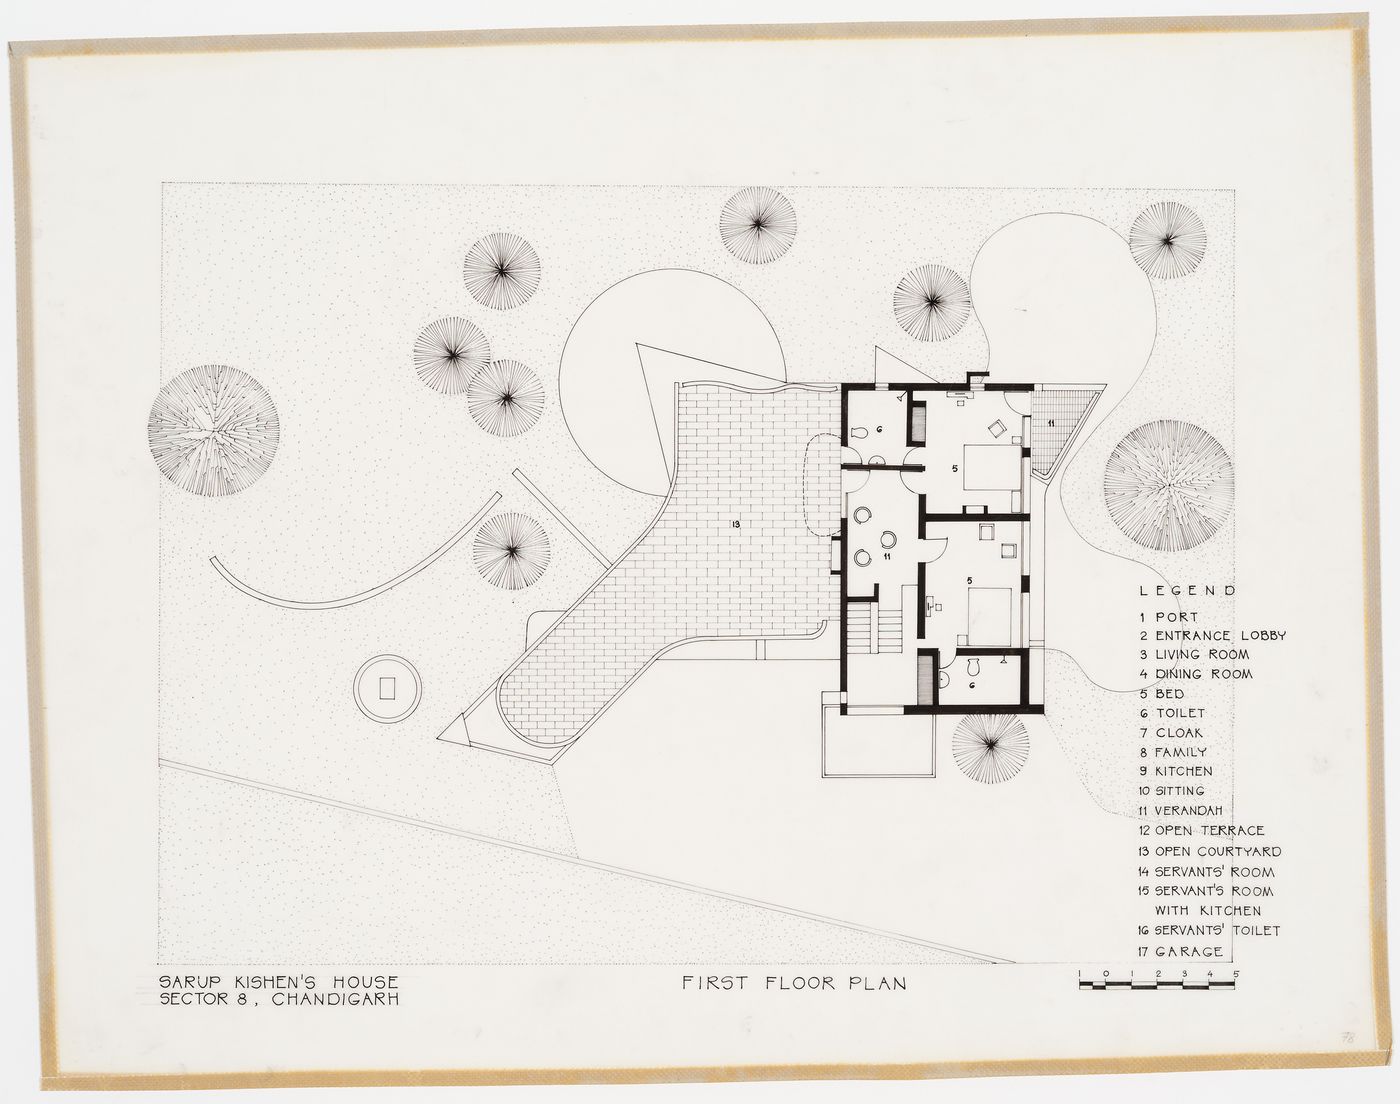 First floor plan for Sarup Kishen's house, Sector 8, Chandigarh, India